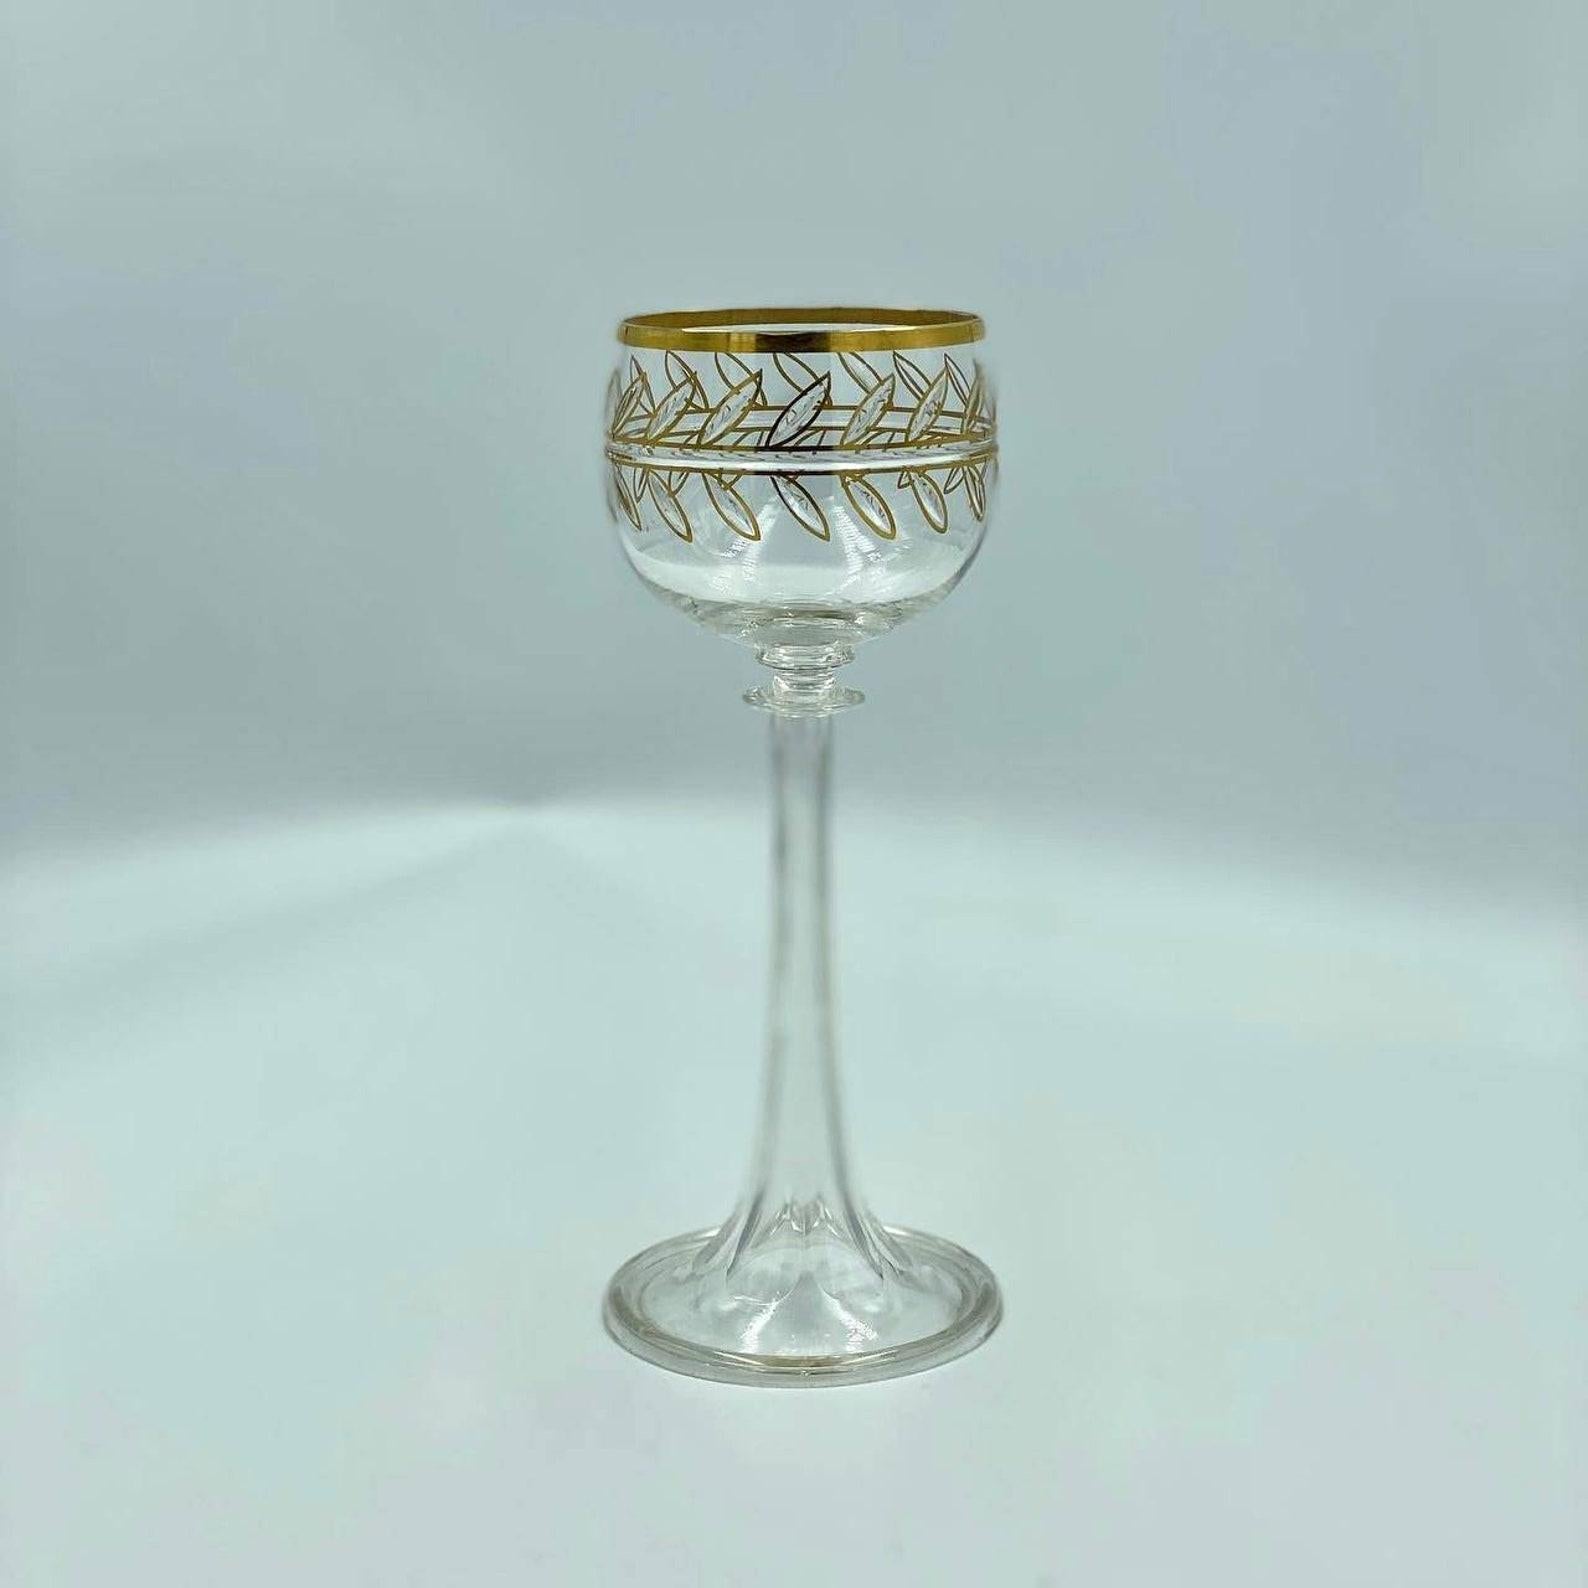 French Antique Crystal Glasses With 24K gold  Amazing Rare Set Of Crystal Glasses For Sale